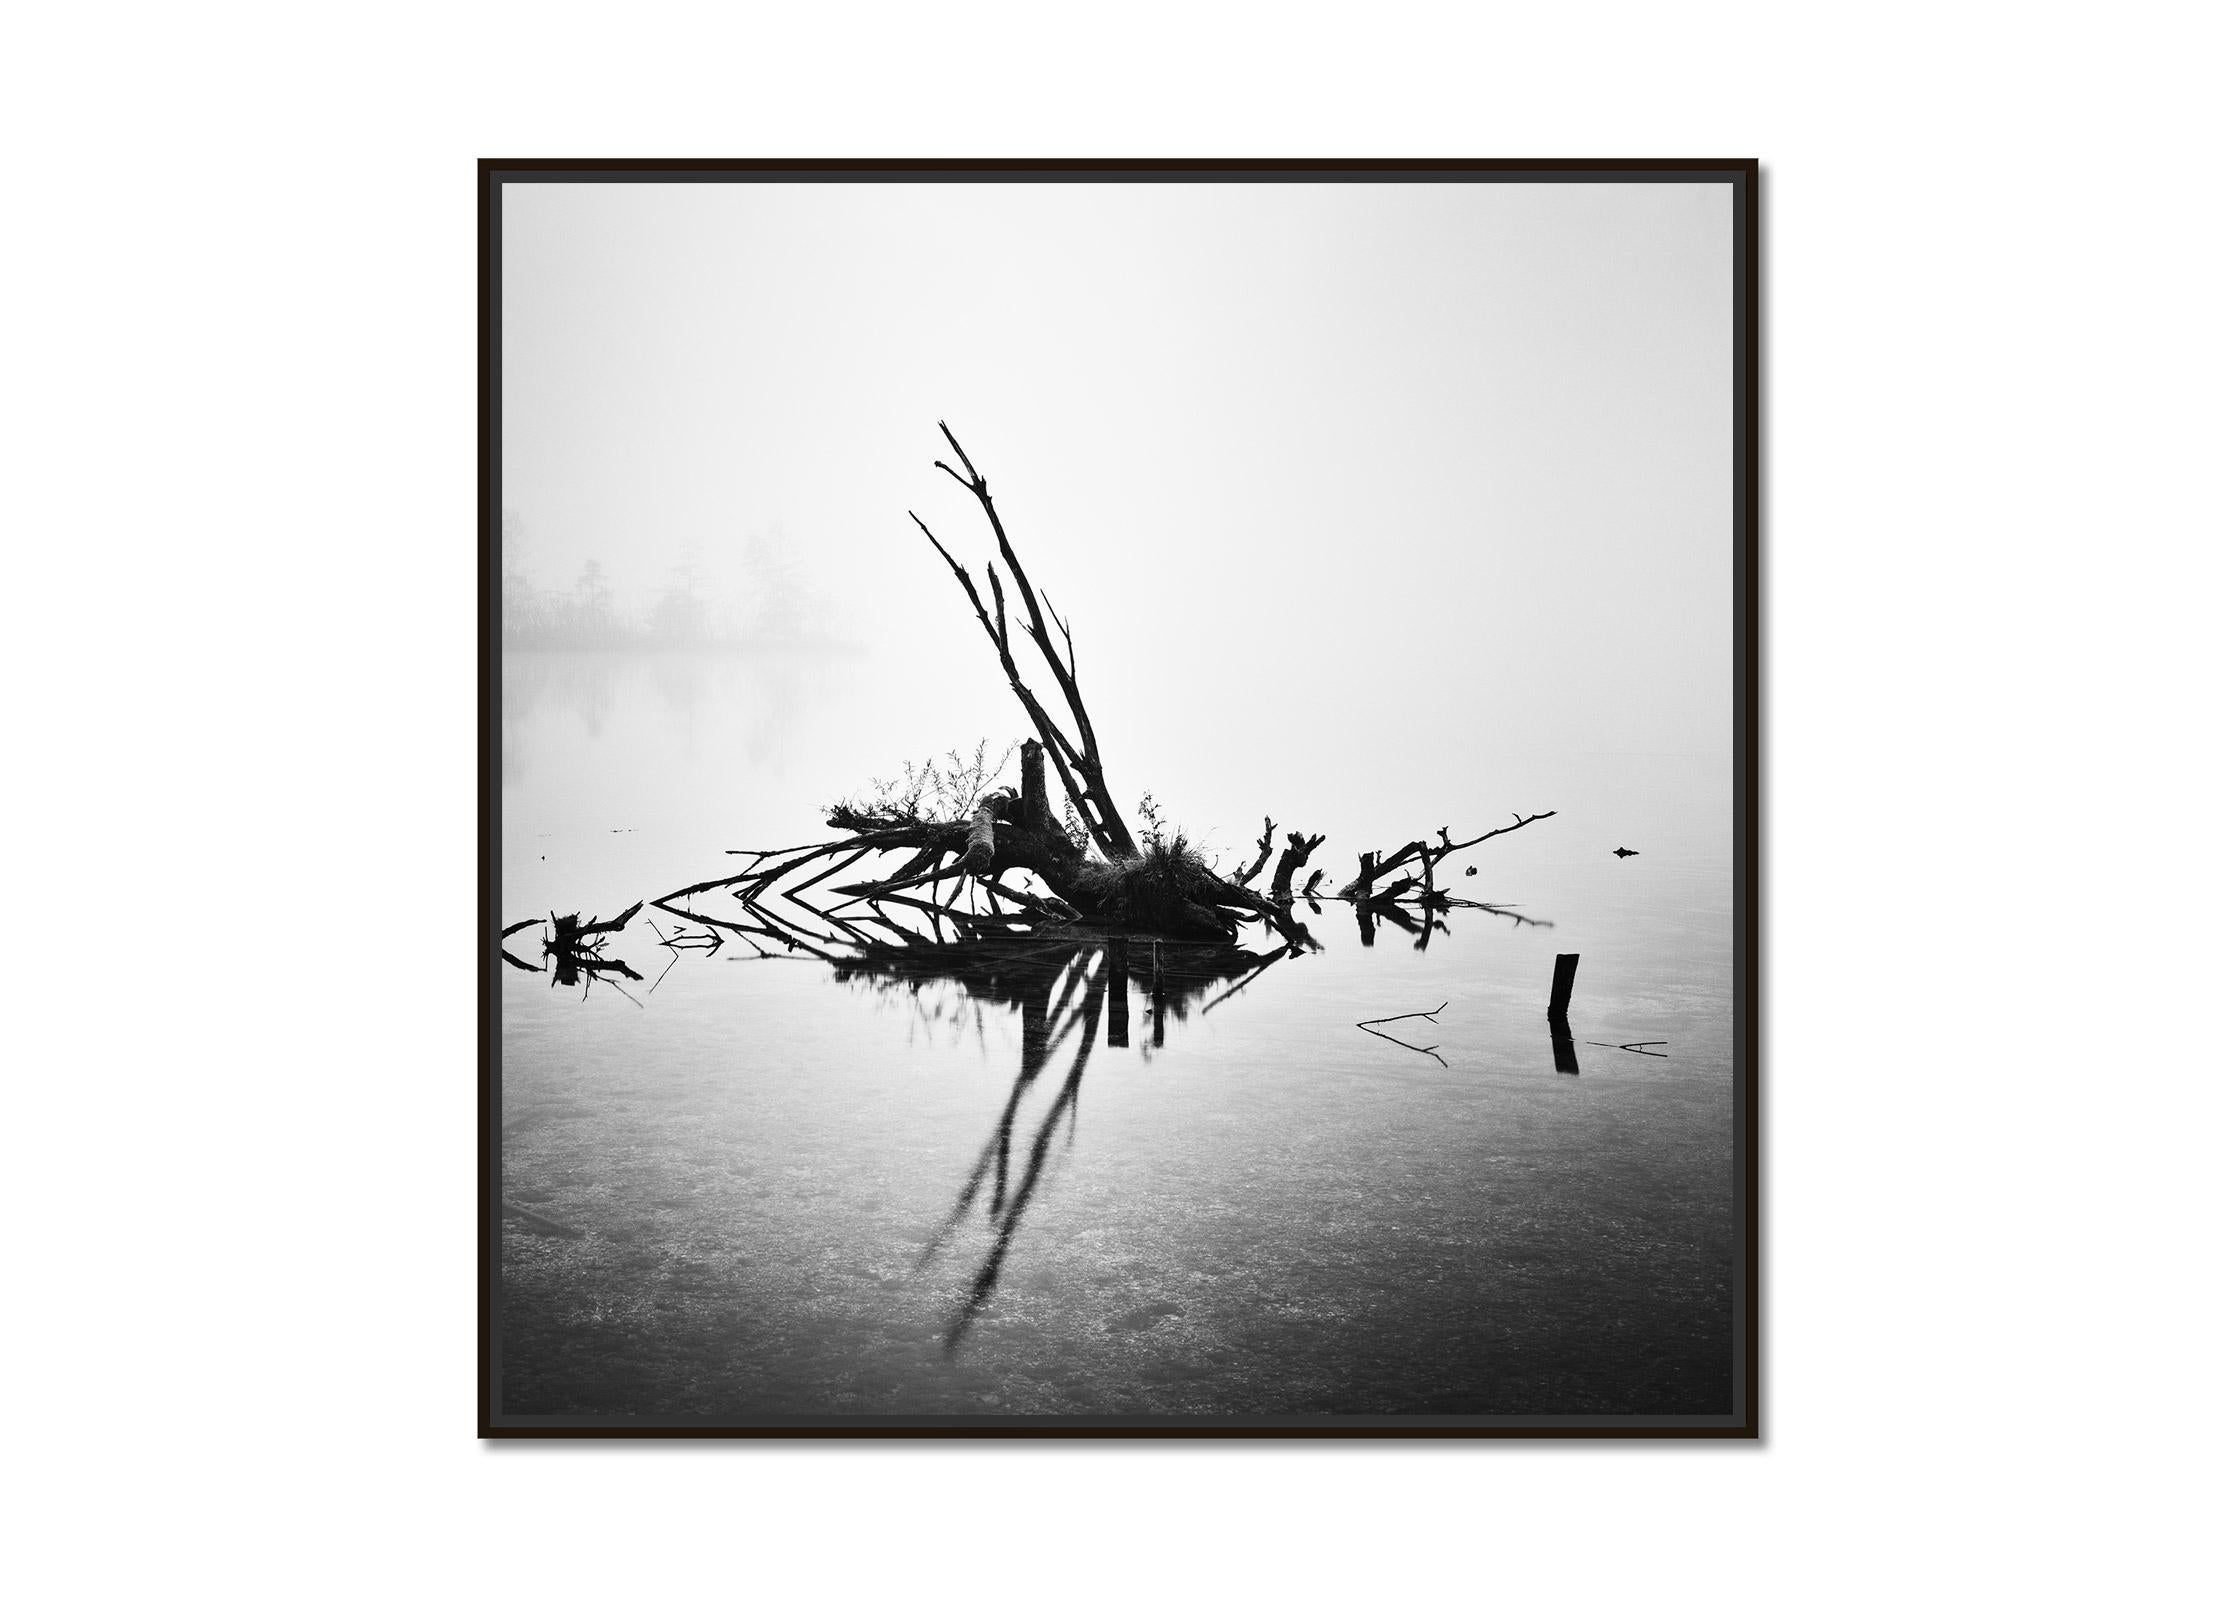 Fallen Tree, Almsee, Austria, black and white photography, fine art landscape - Photograph by Gerald Berghammer, Ina Forstinger